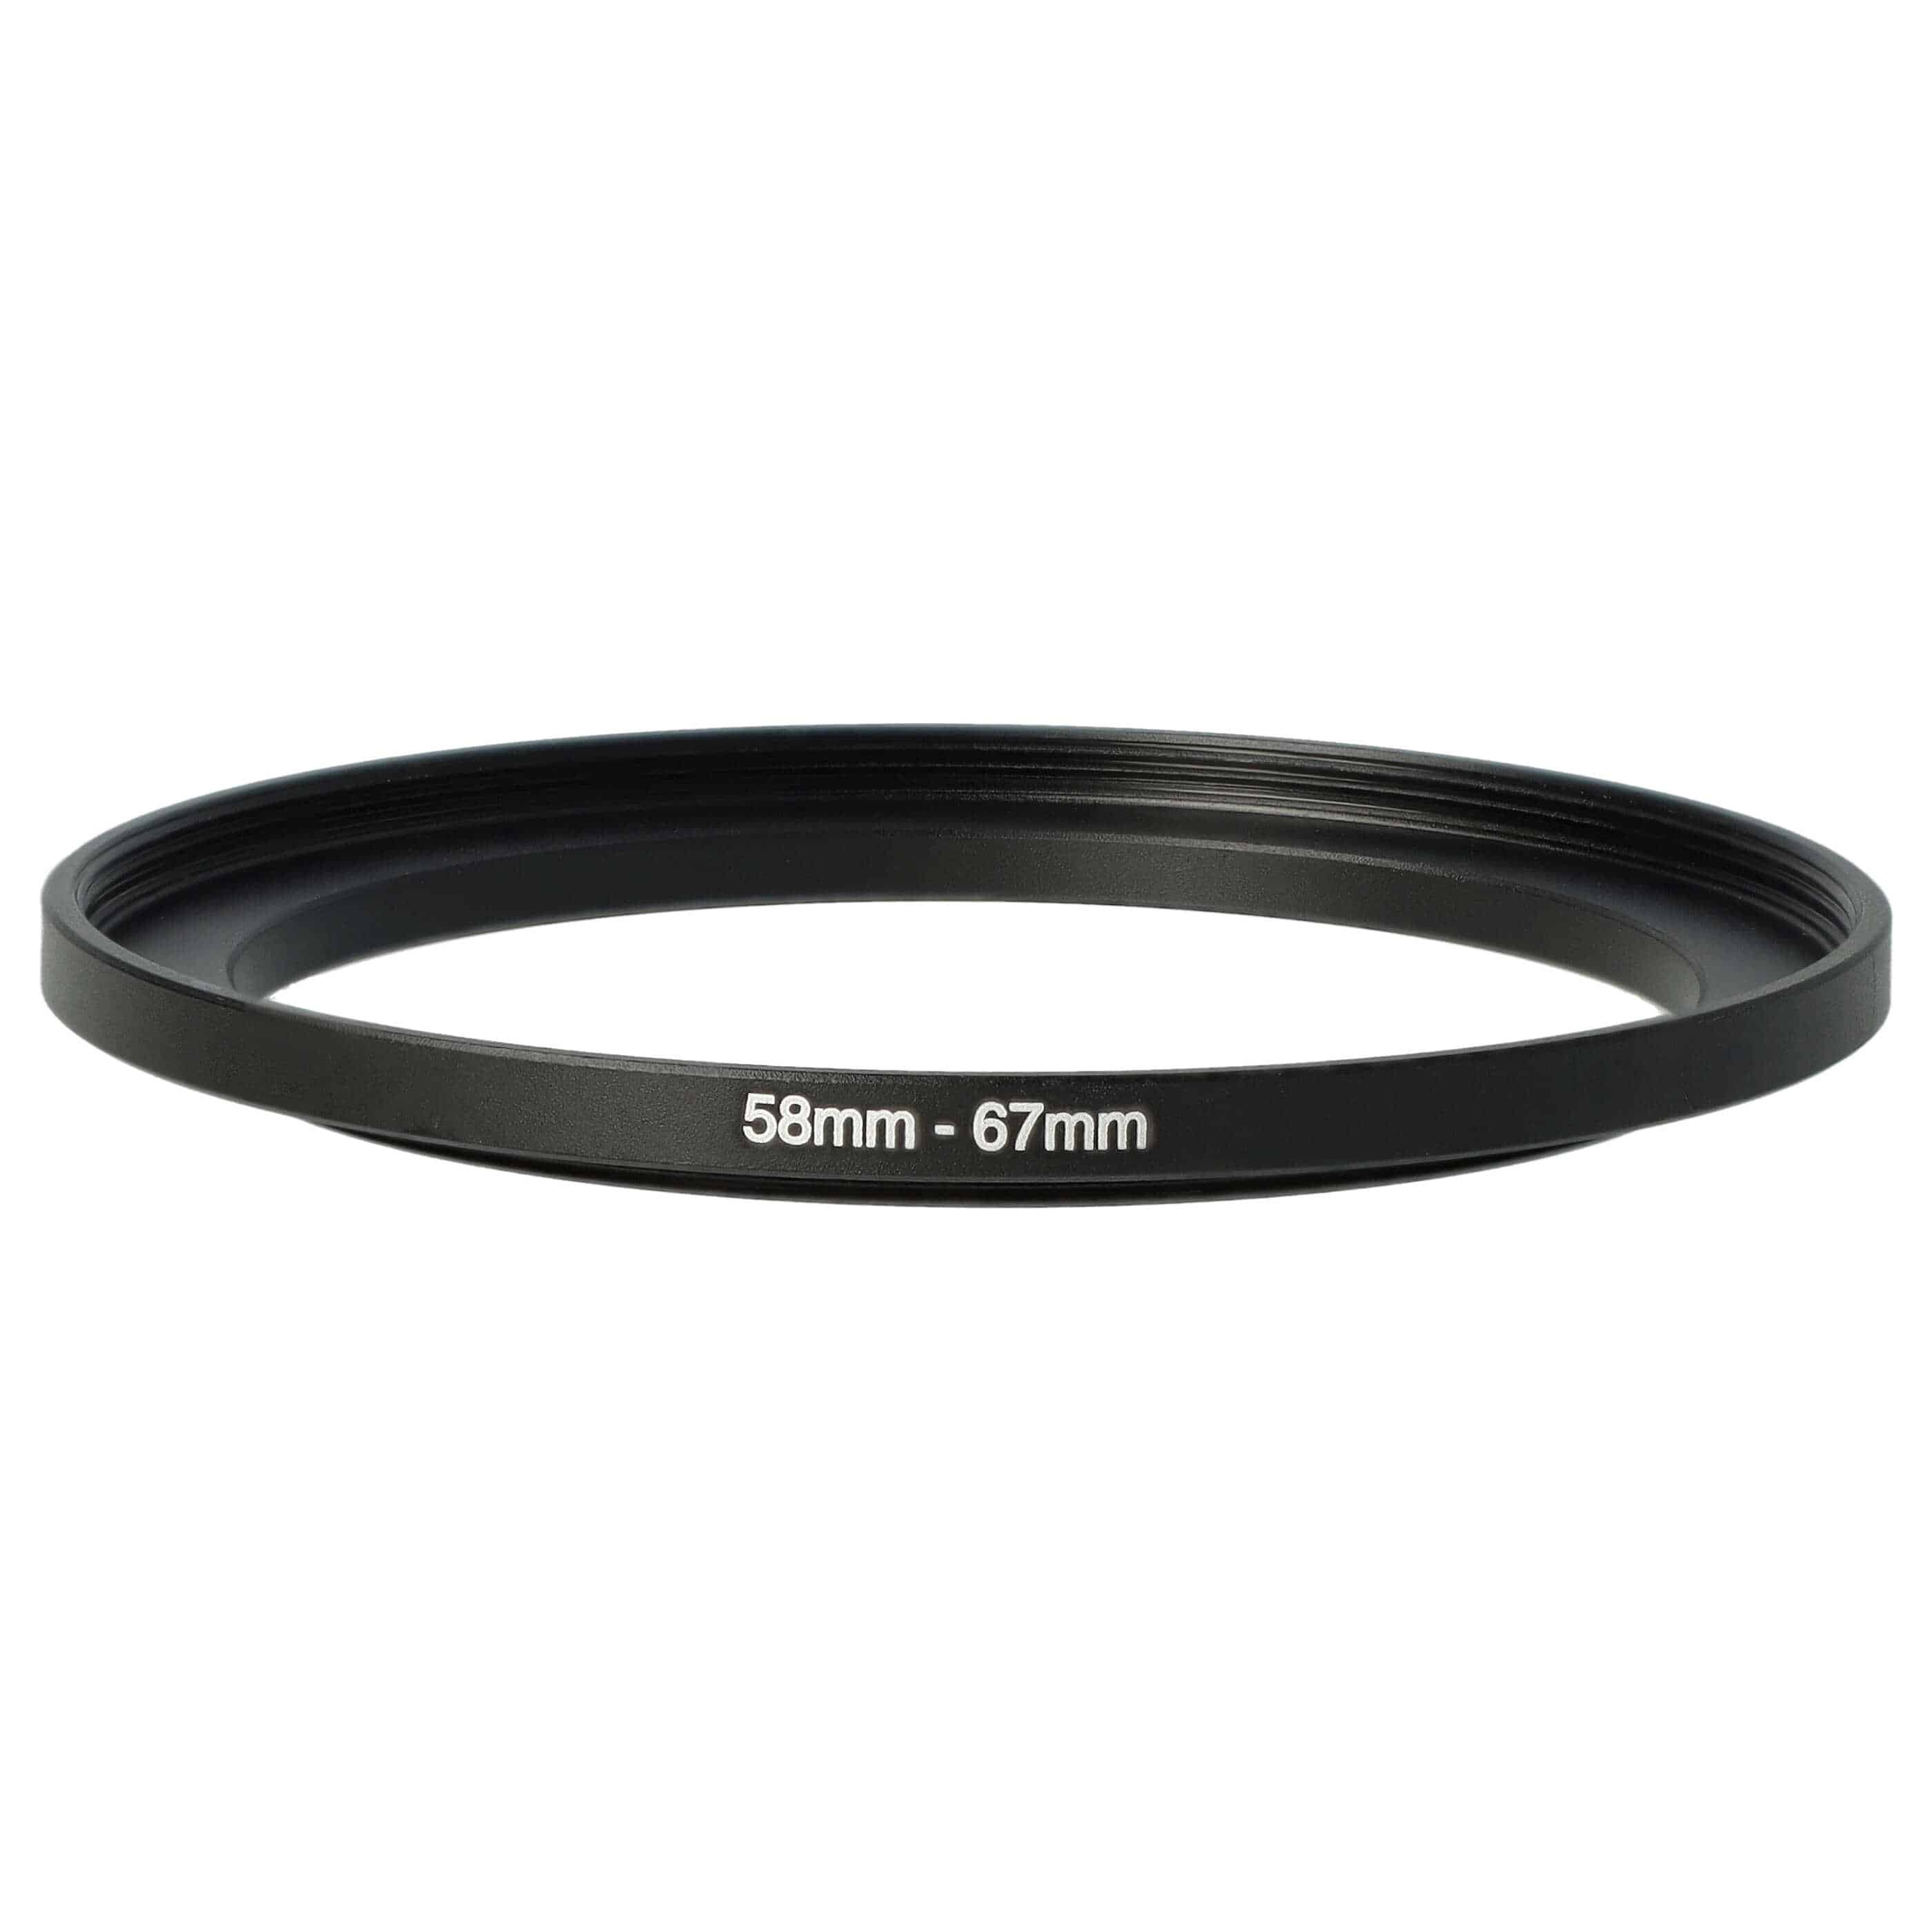 Step-Up Ring Adapter of 58 mm to 67 mmfor various Camera Lens - Filter Adapter